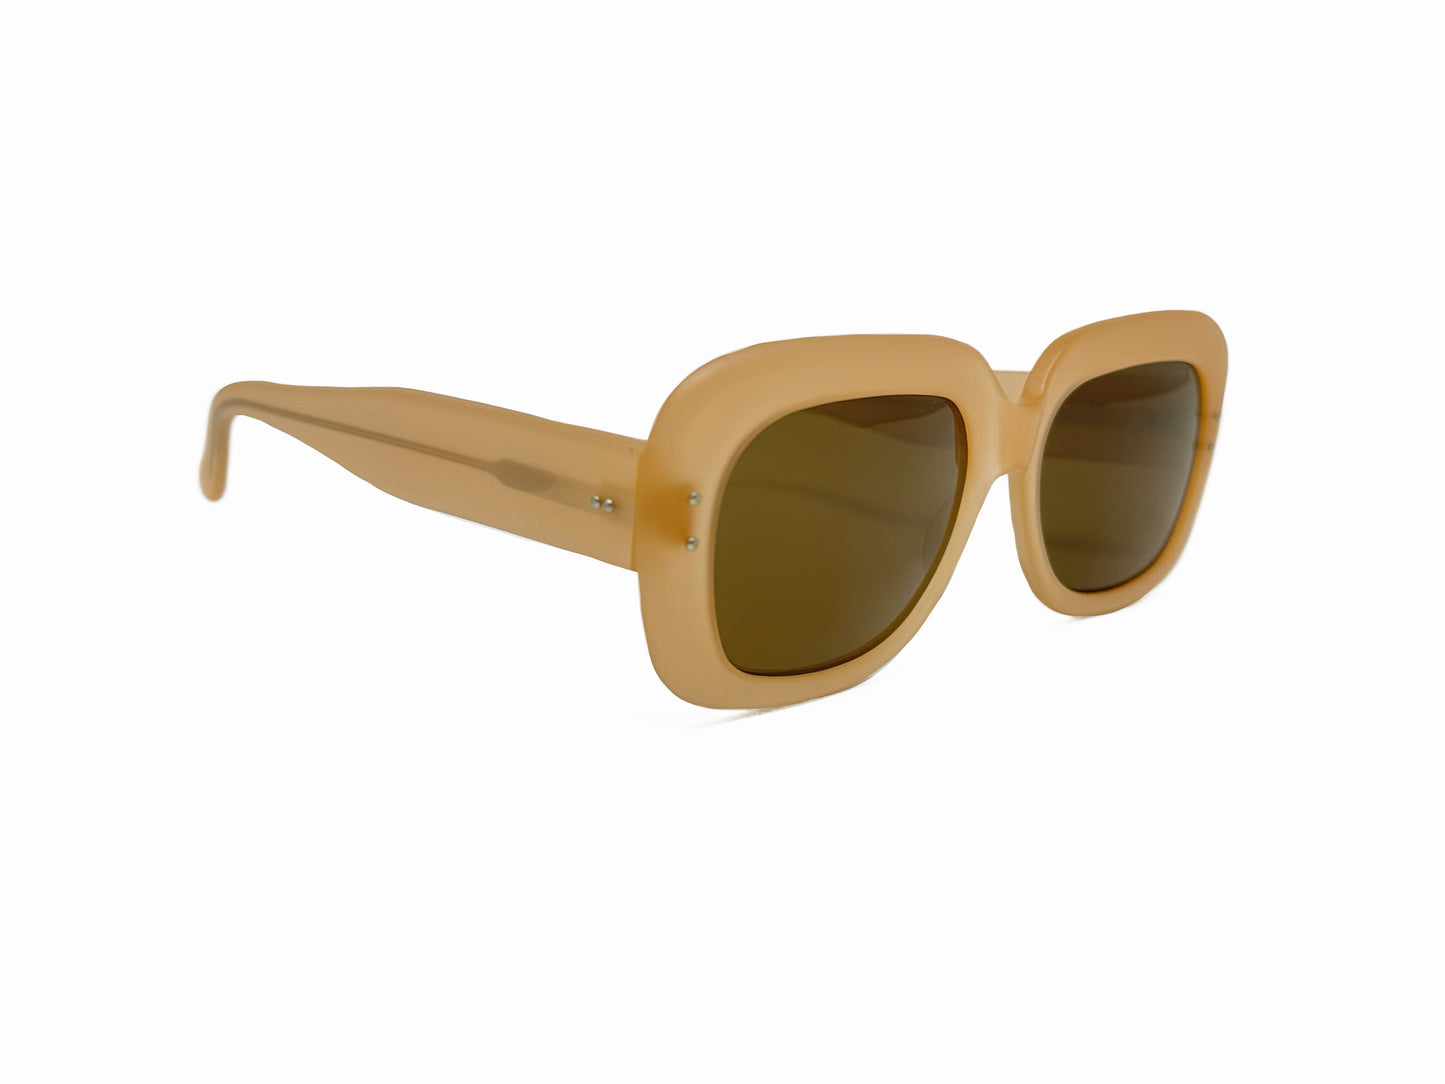 Kador rounded-square, acetate sunglasses. Model: 2. Color: M/1652 - Beige with brown lenses. Side view.